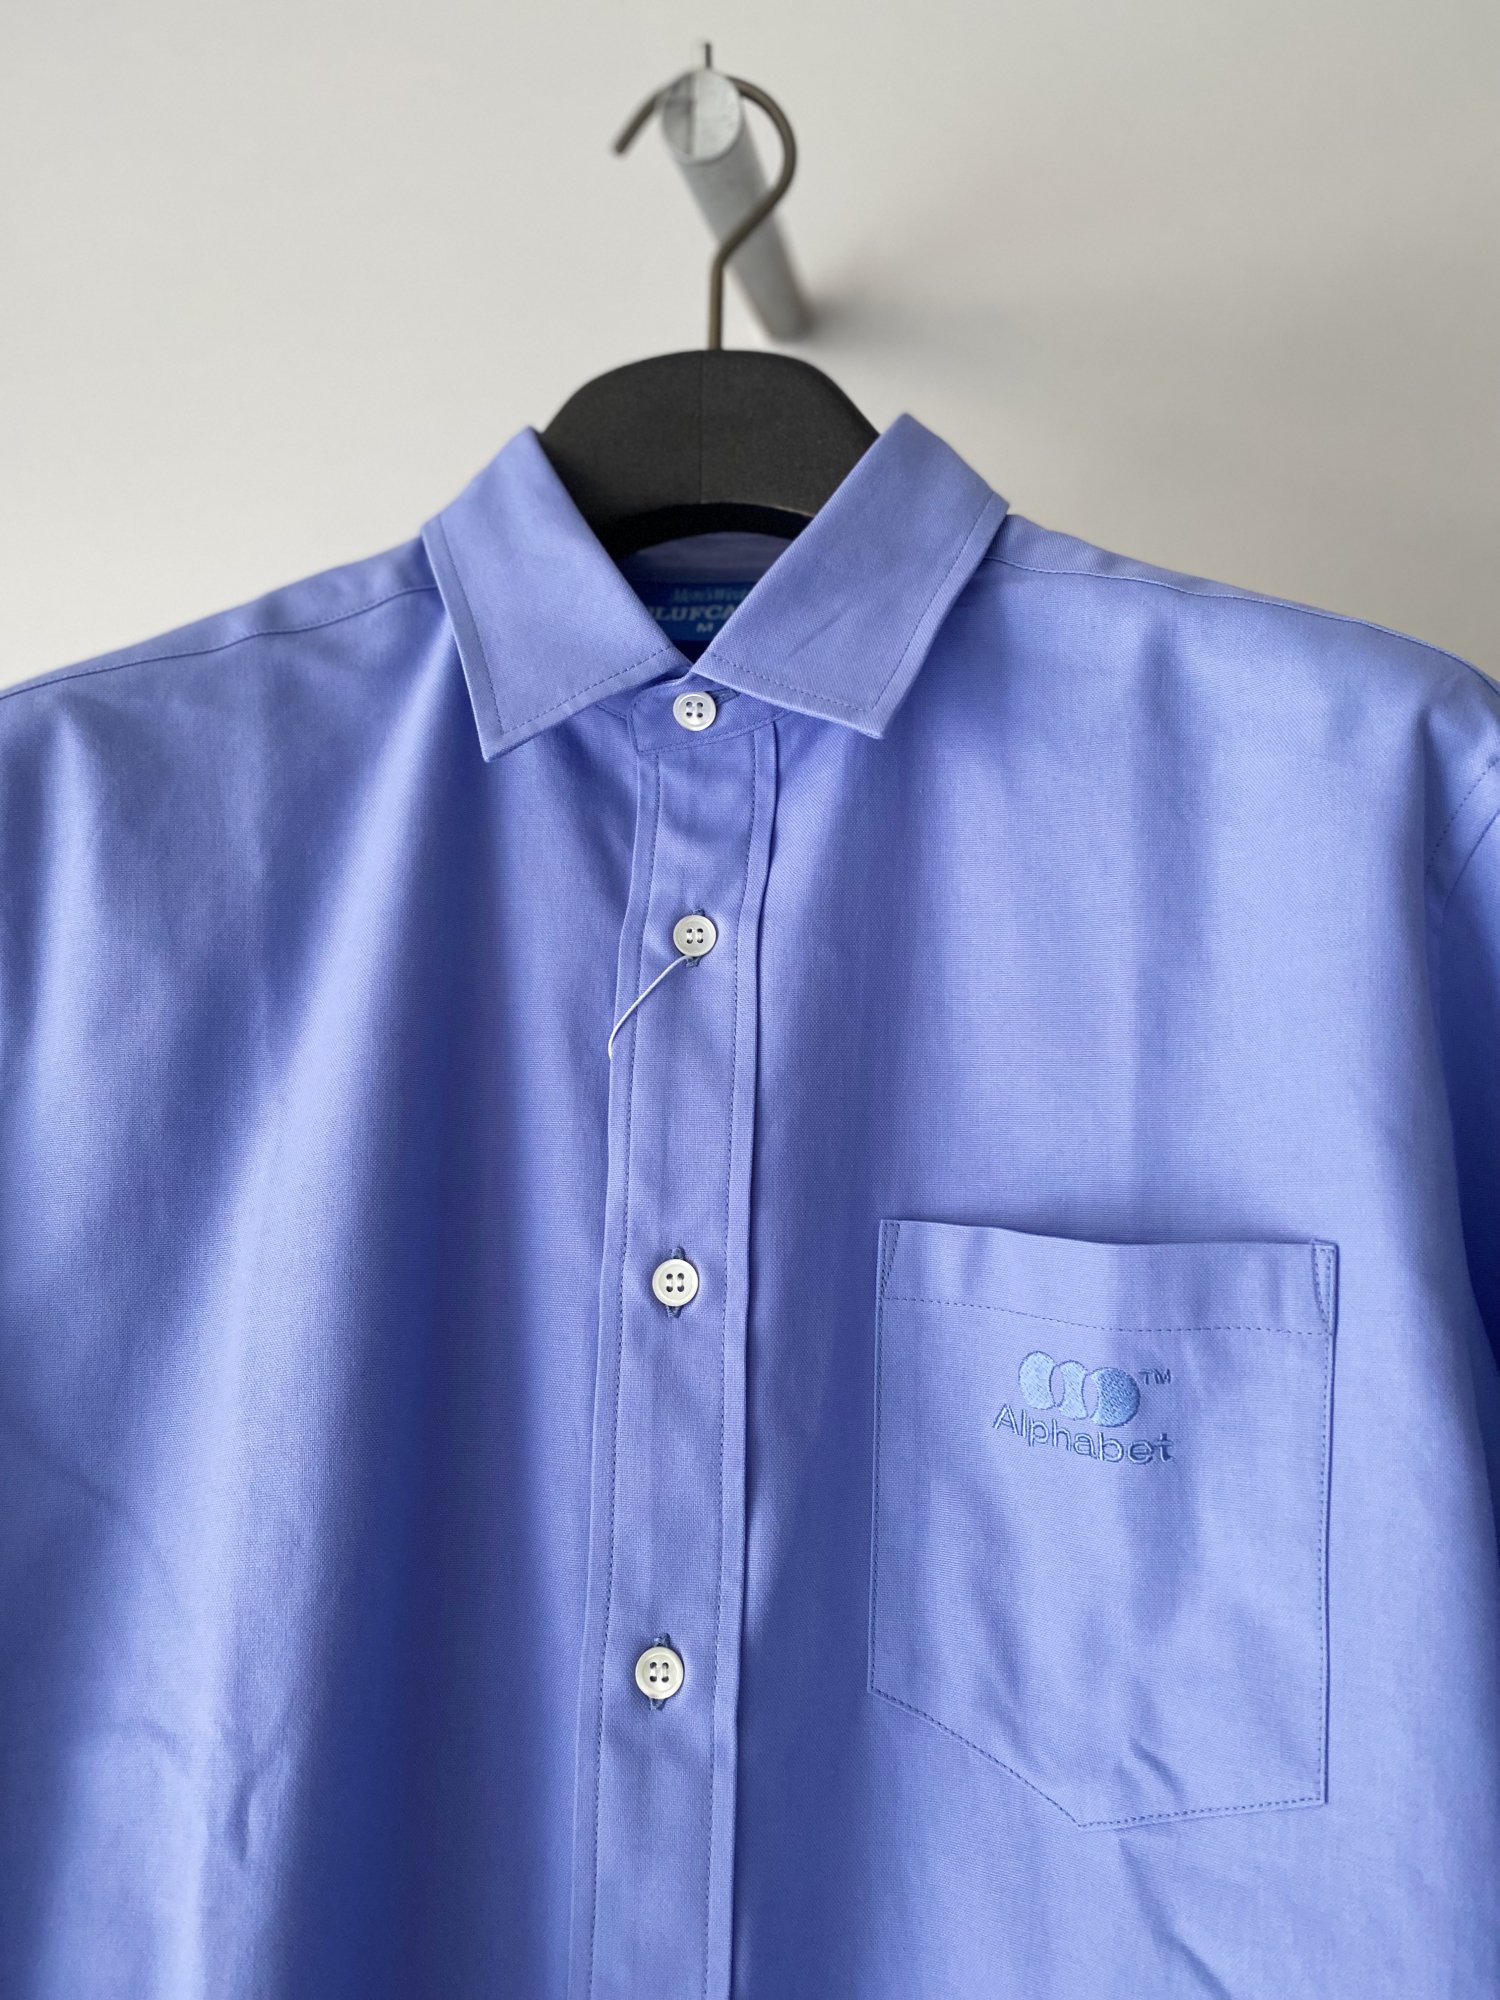 BLUFCAMP<br />Dyed Oxford Shirt / Blue<img class='new_mark_img2' src='https://img.shop-pro.jp/img/new/icons14.gif' style='border:none;display:inline;margin:0px;padding:0px;width:auto;' />